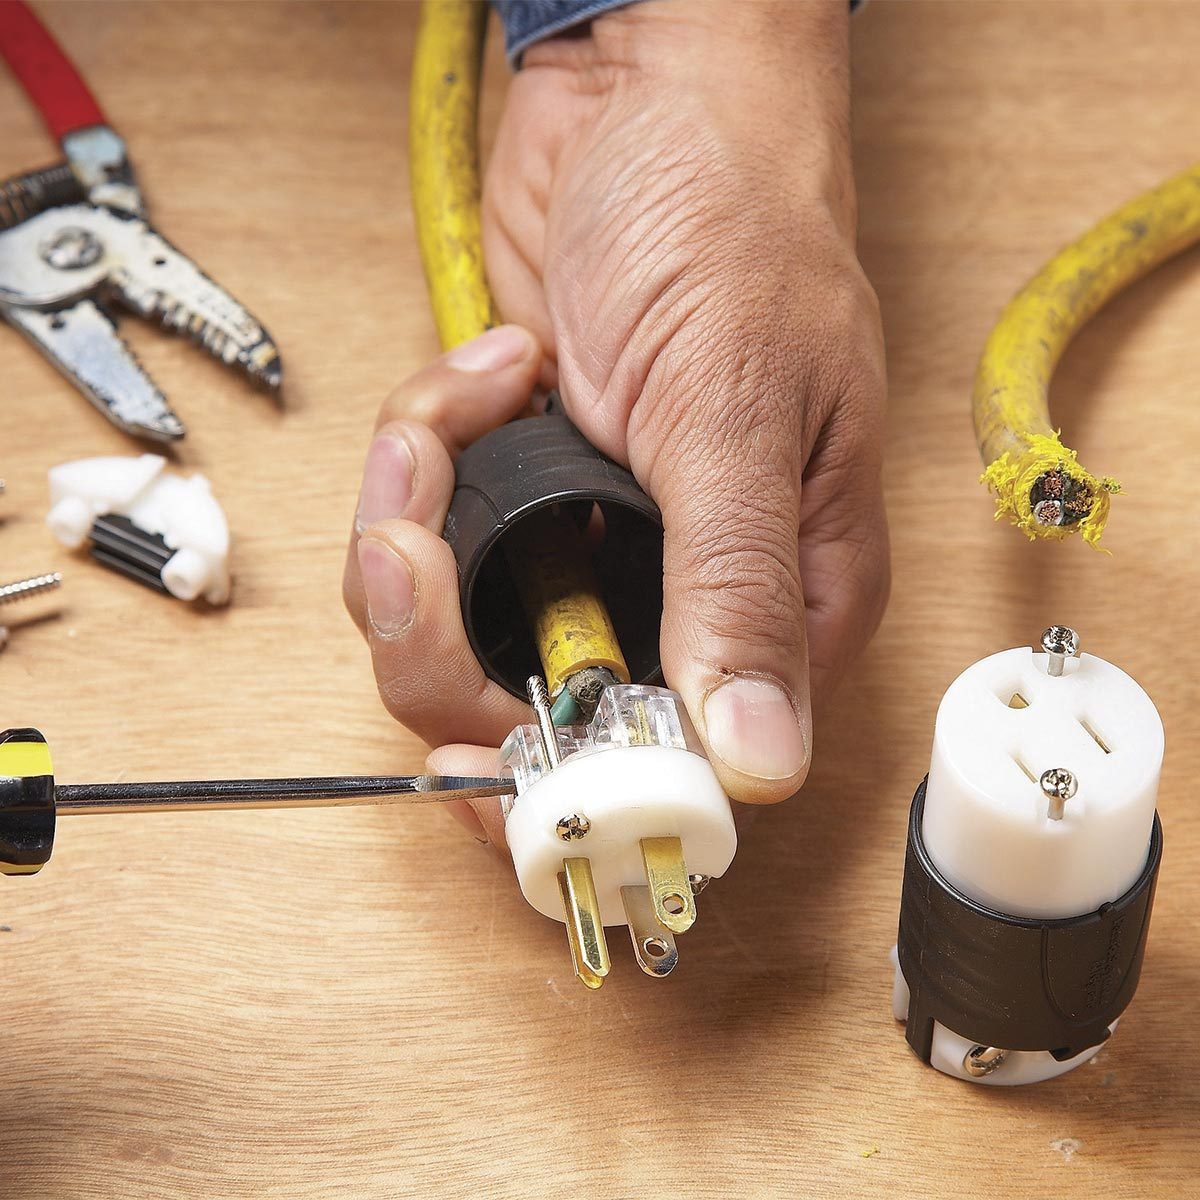 18 DIY Fixes for Broken Electrical Items at Home